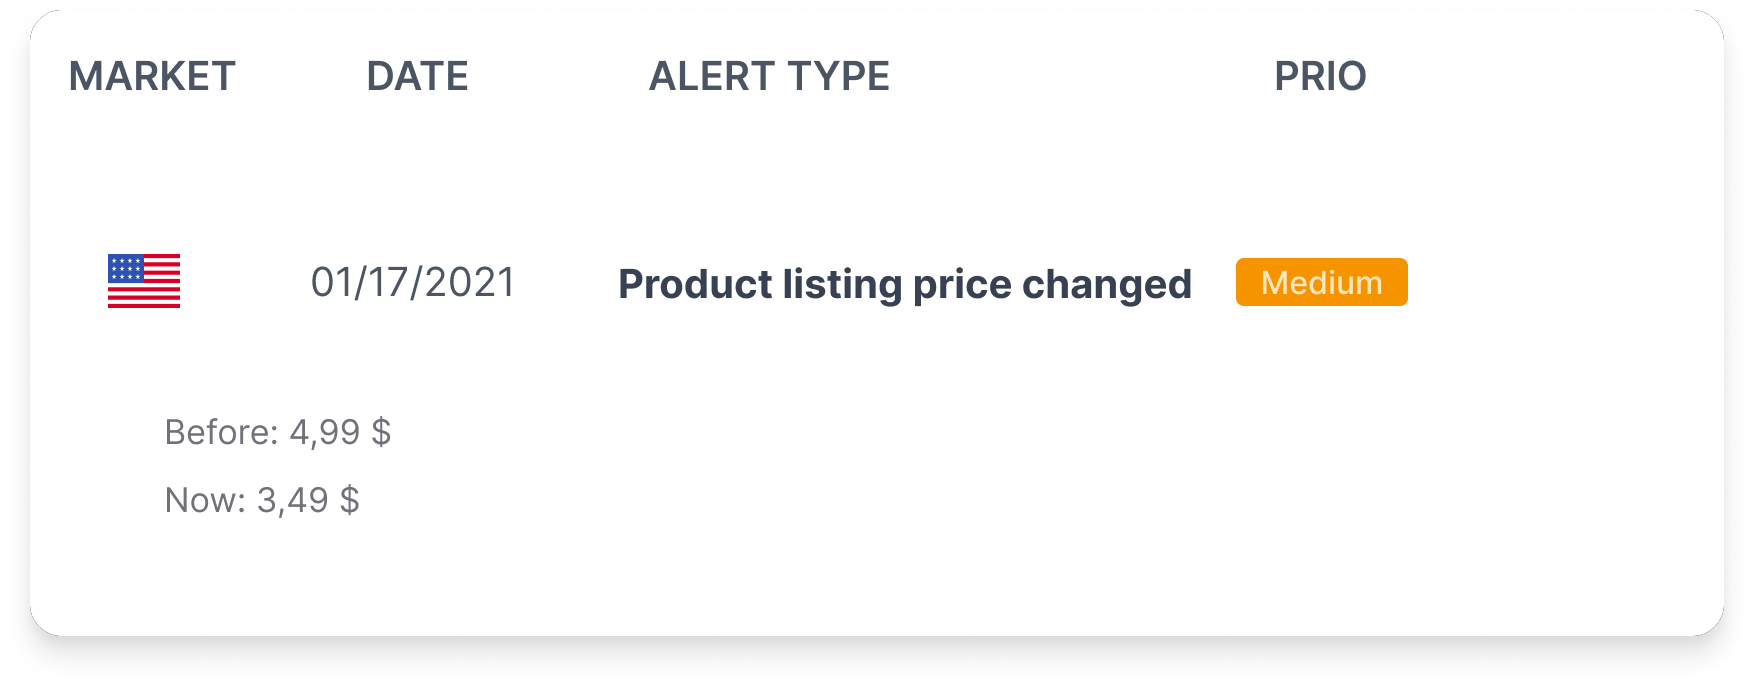 Amazon alert product listing price changed additional information